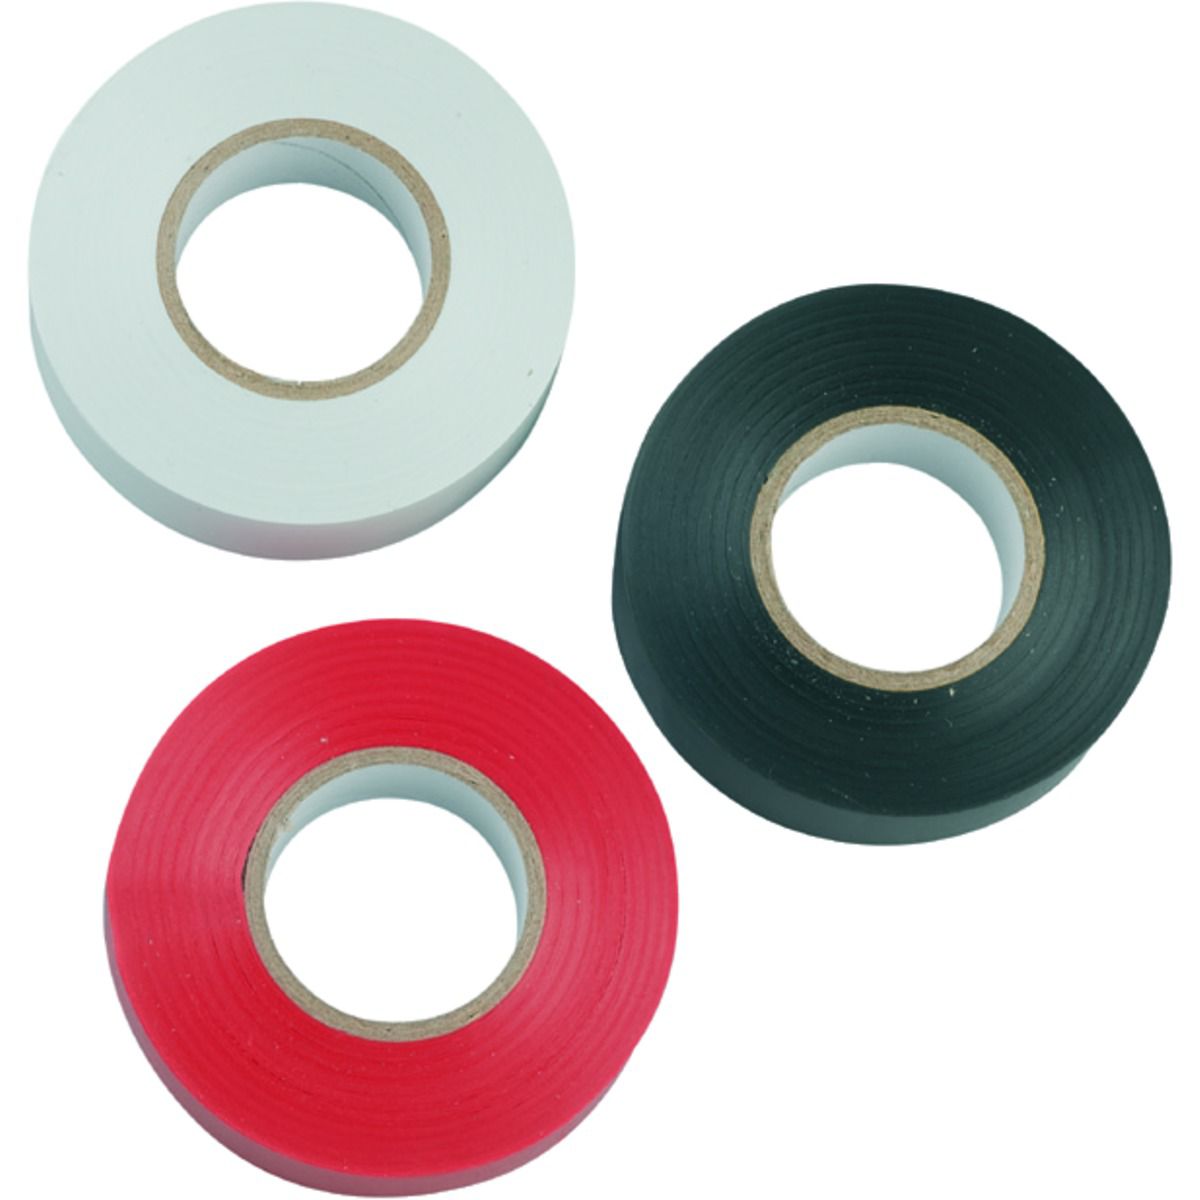 Image of Deta Red White & Black PVC Electrical Insulation Tape - 20m x 19mm - Pack of 3